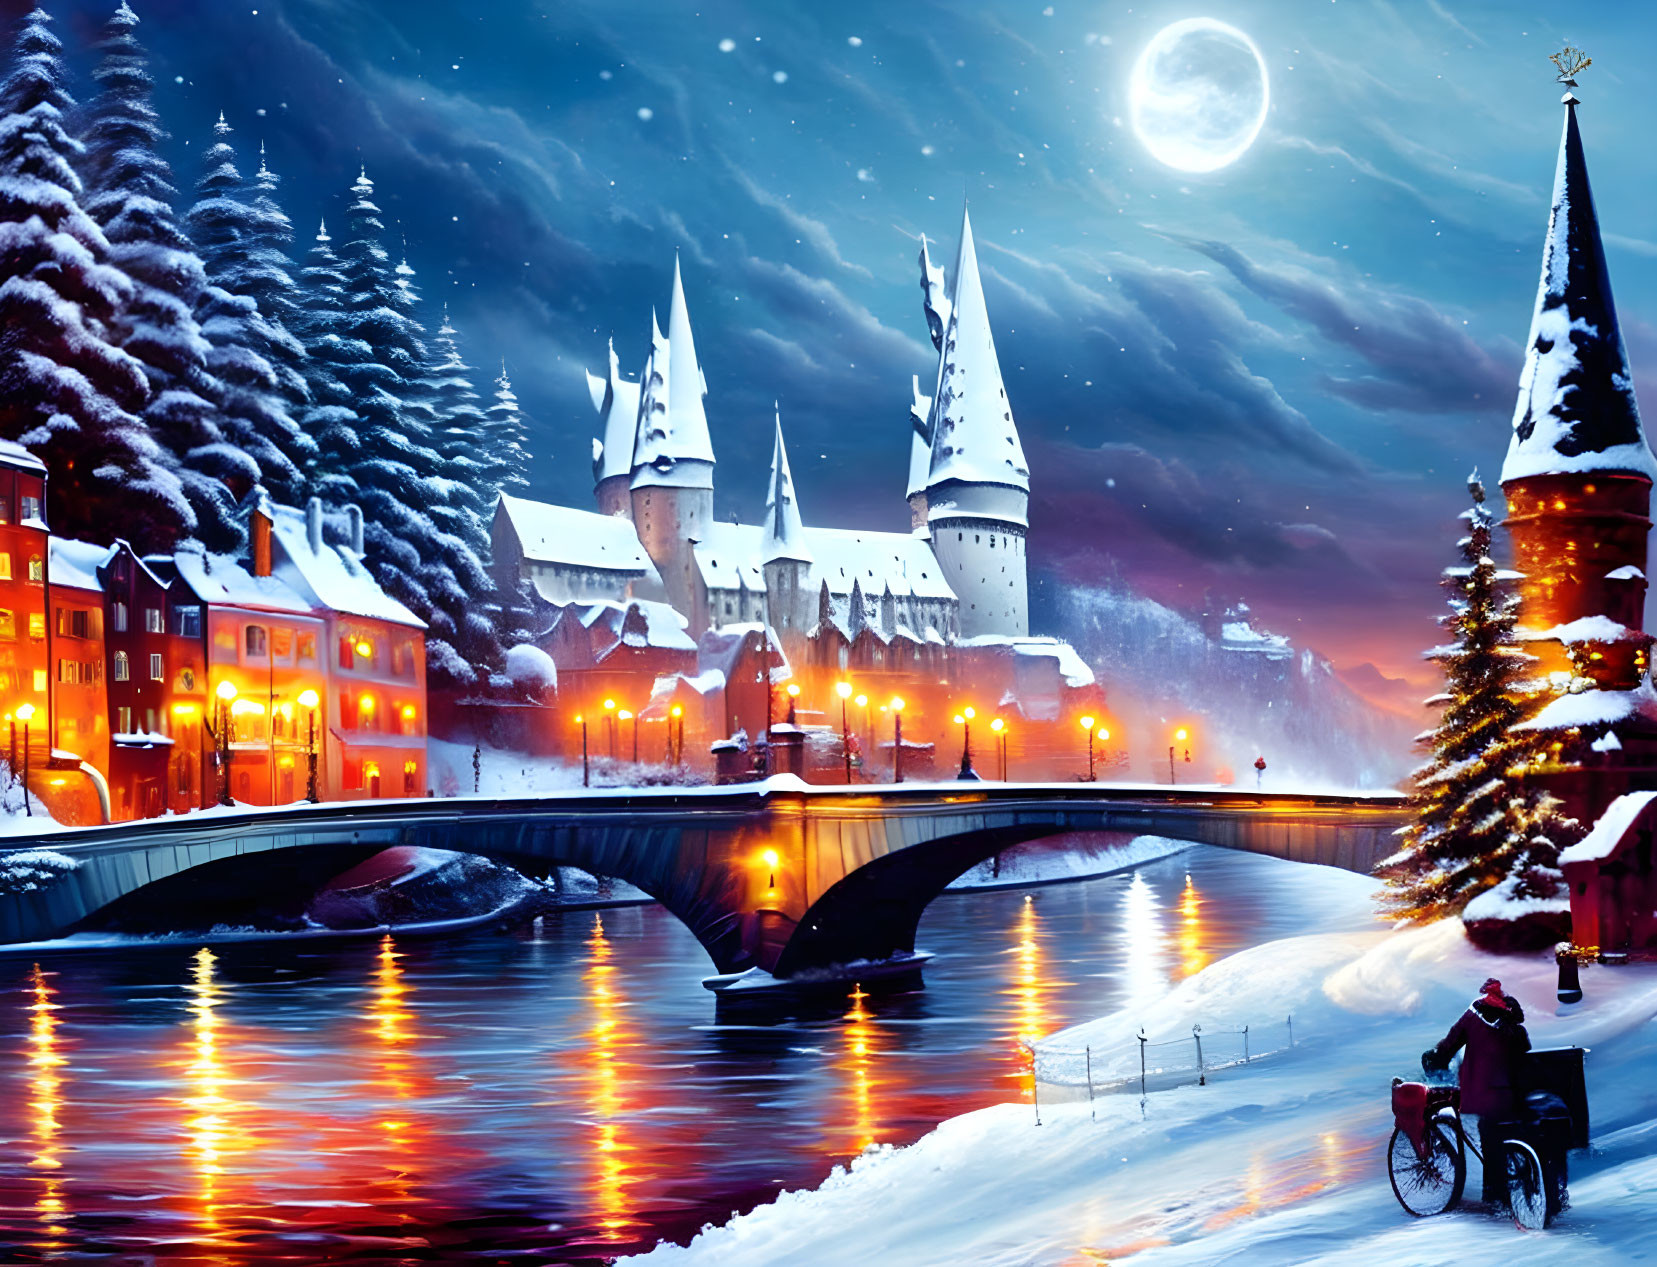 Winter Castle Scene with River Bridge, Snowy Trees, and Full Moon